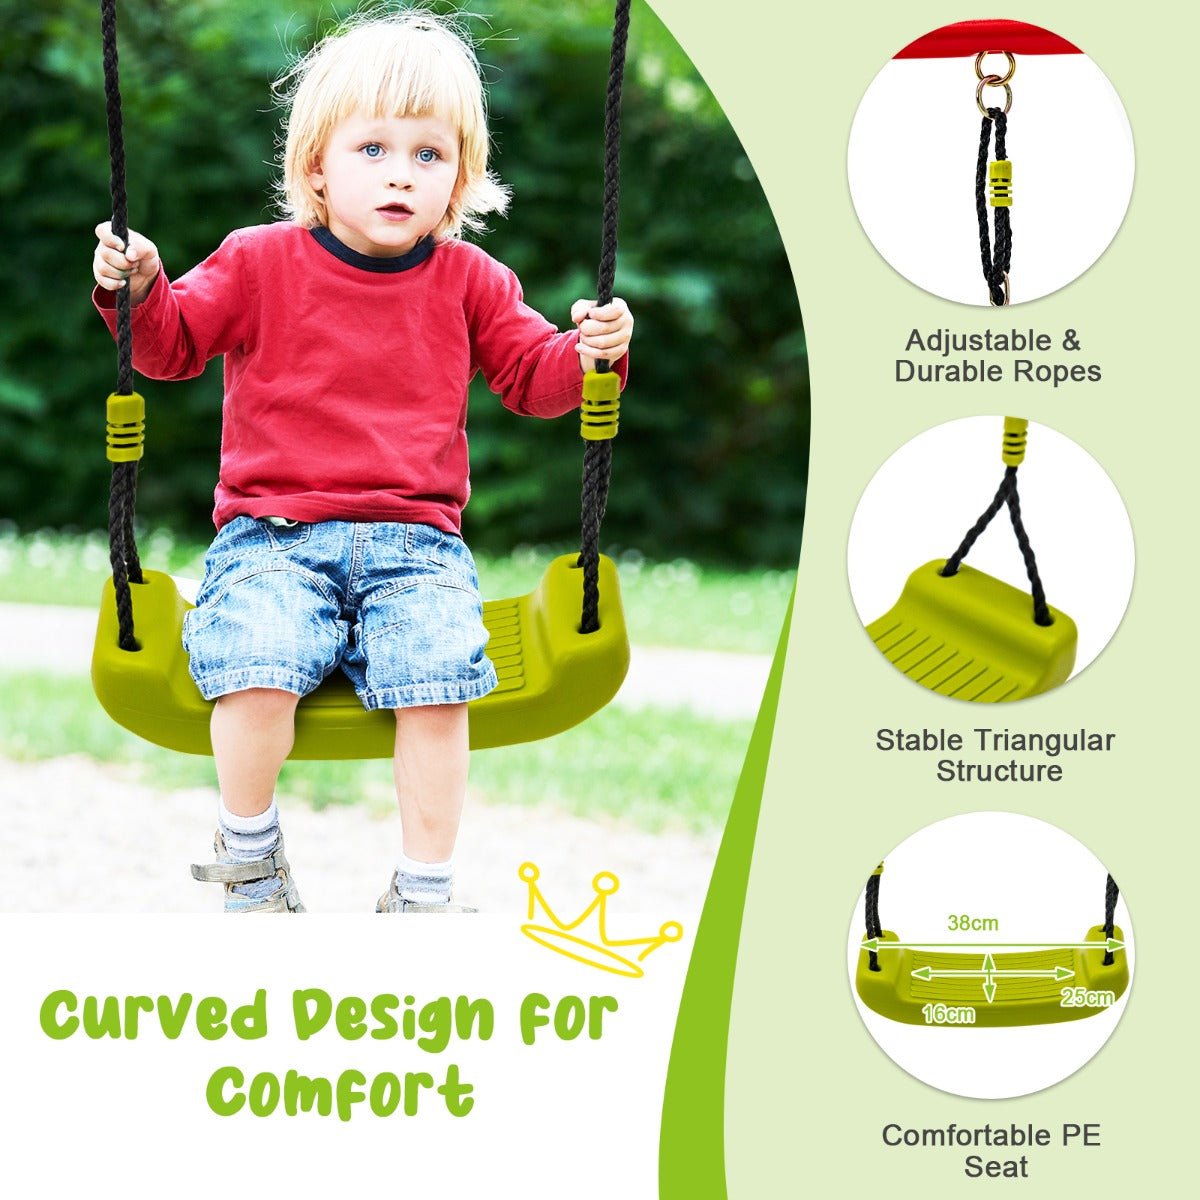 Outdoor Playtime Fun: Swing Set with Climbing Ladder for Kids